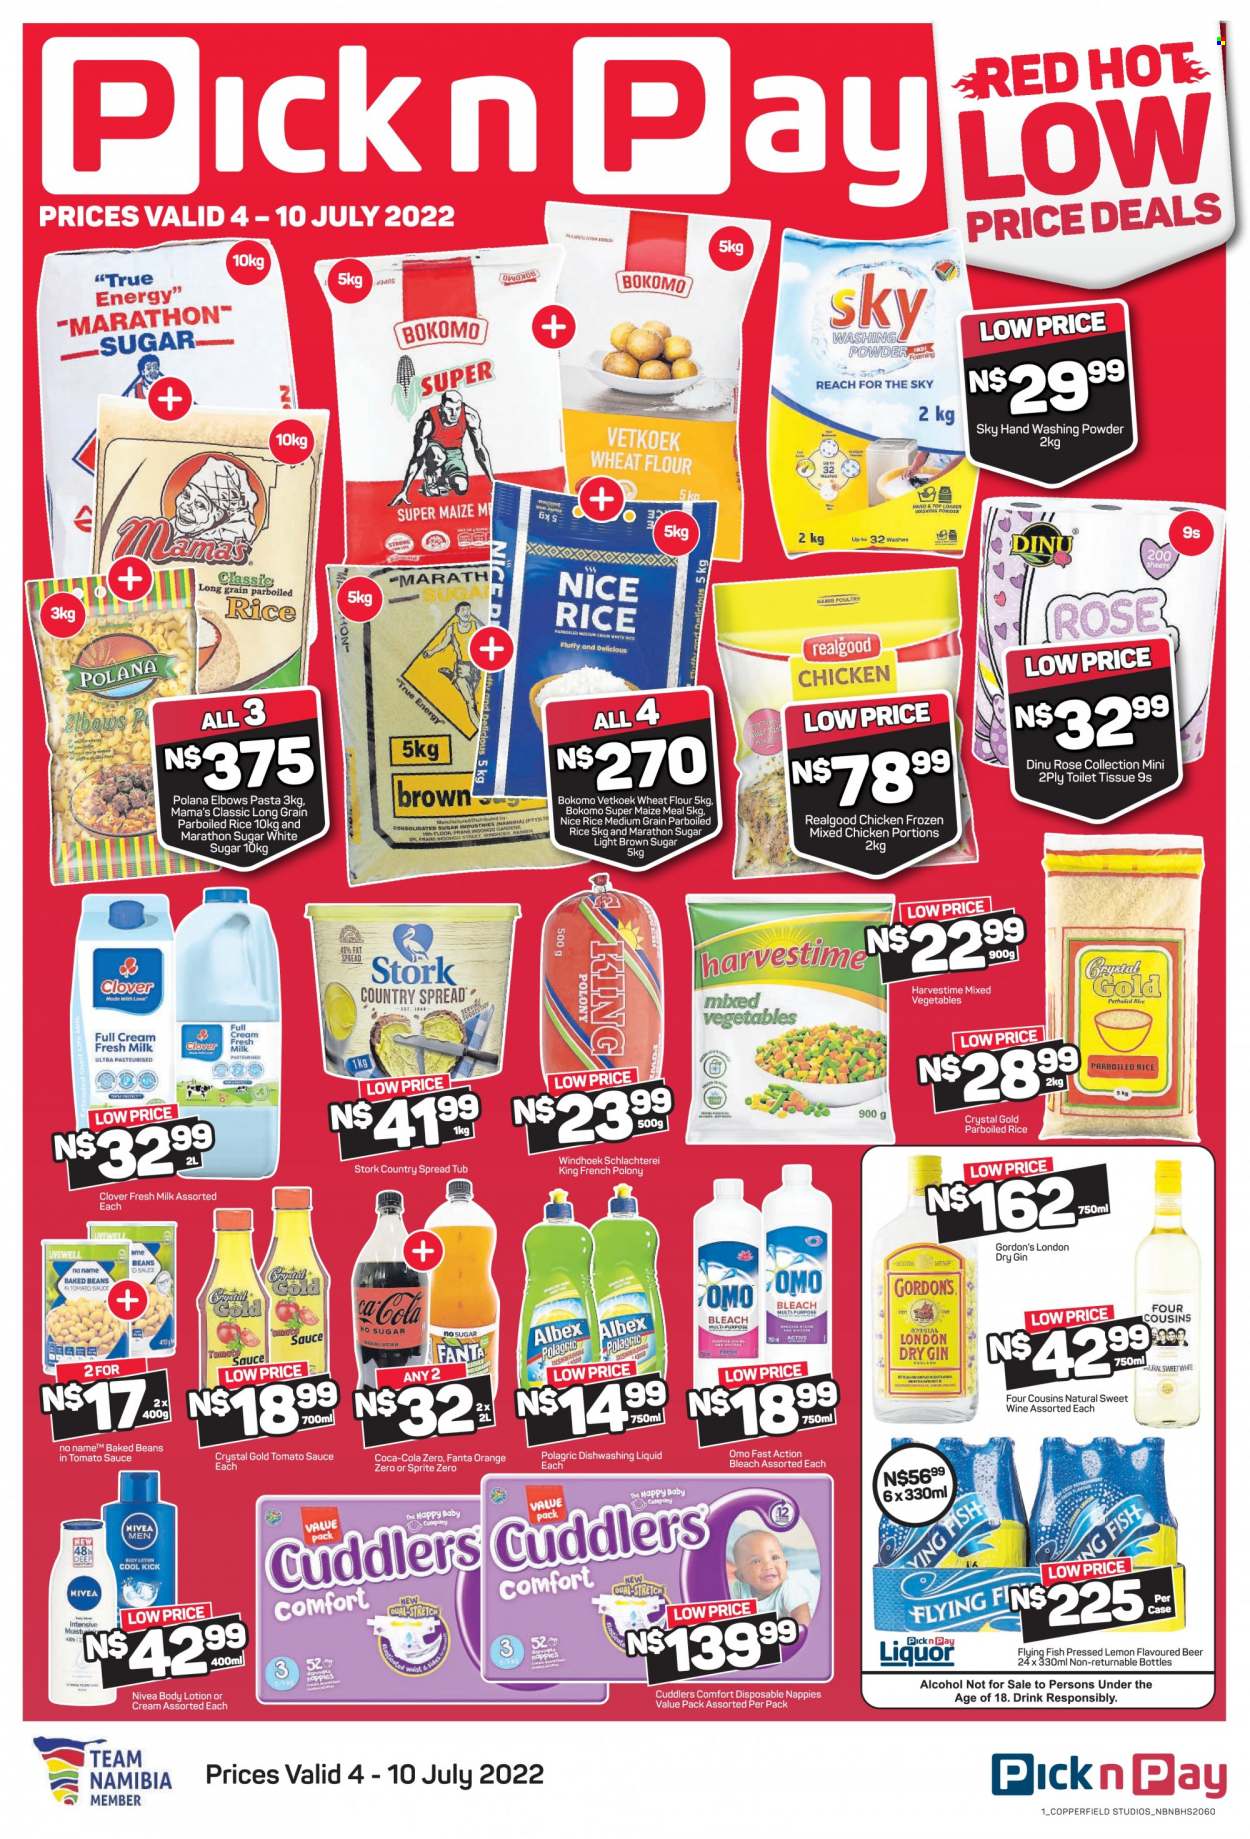 Pick n Pay catalogue  - 04/07/2022 - 10/07/2022 - Sales products - beans, orange, fish, No Name, pasta, Mama's, french polony, polony, milk, fat spread, mixed vegetables, Harvestime, cane sugar, flour, wheat flour, maize meal, baked beans, rice, parboiled rice, Coca-Cola, Sprite, Fanta, Coca-Cola zero, alcohol, rosé wine, gin, liquor, Gordon's, beer, nappies, bleach, Omo, laundry powder, dishwashing liquid, Nivea, body lotion, BIC. Page 1.